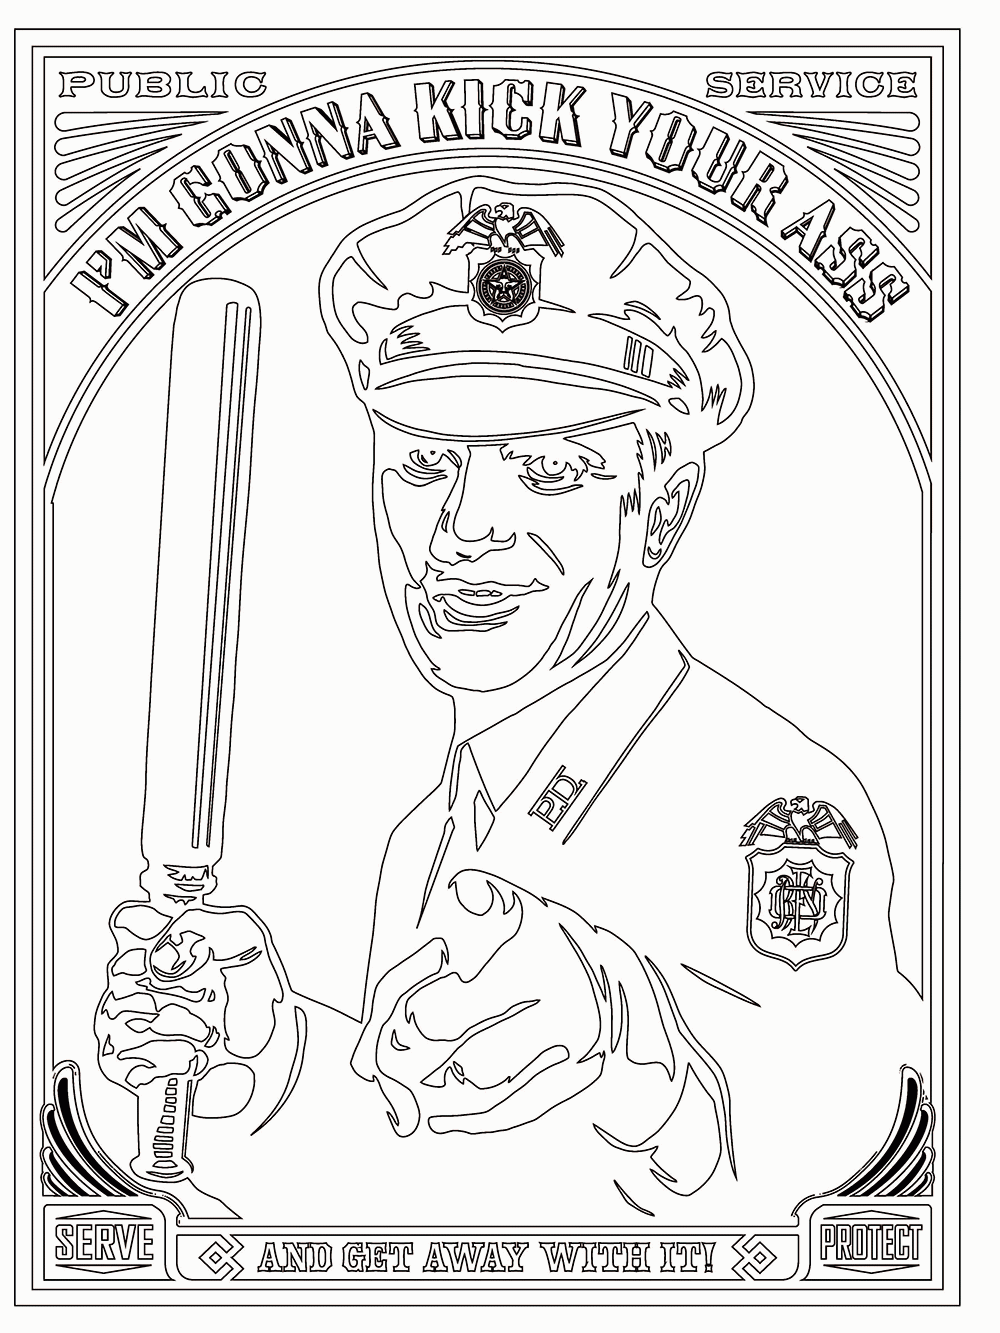 Police Colouring Book - High Quality Coloring Pages